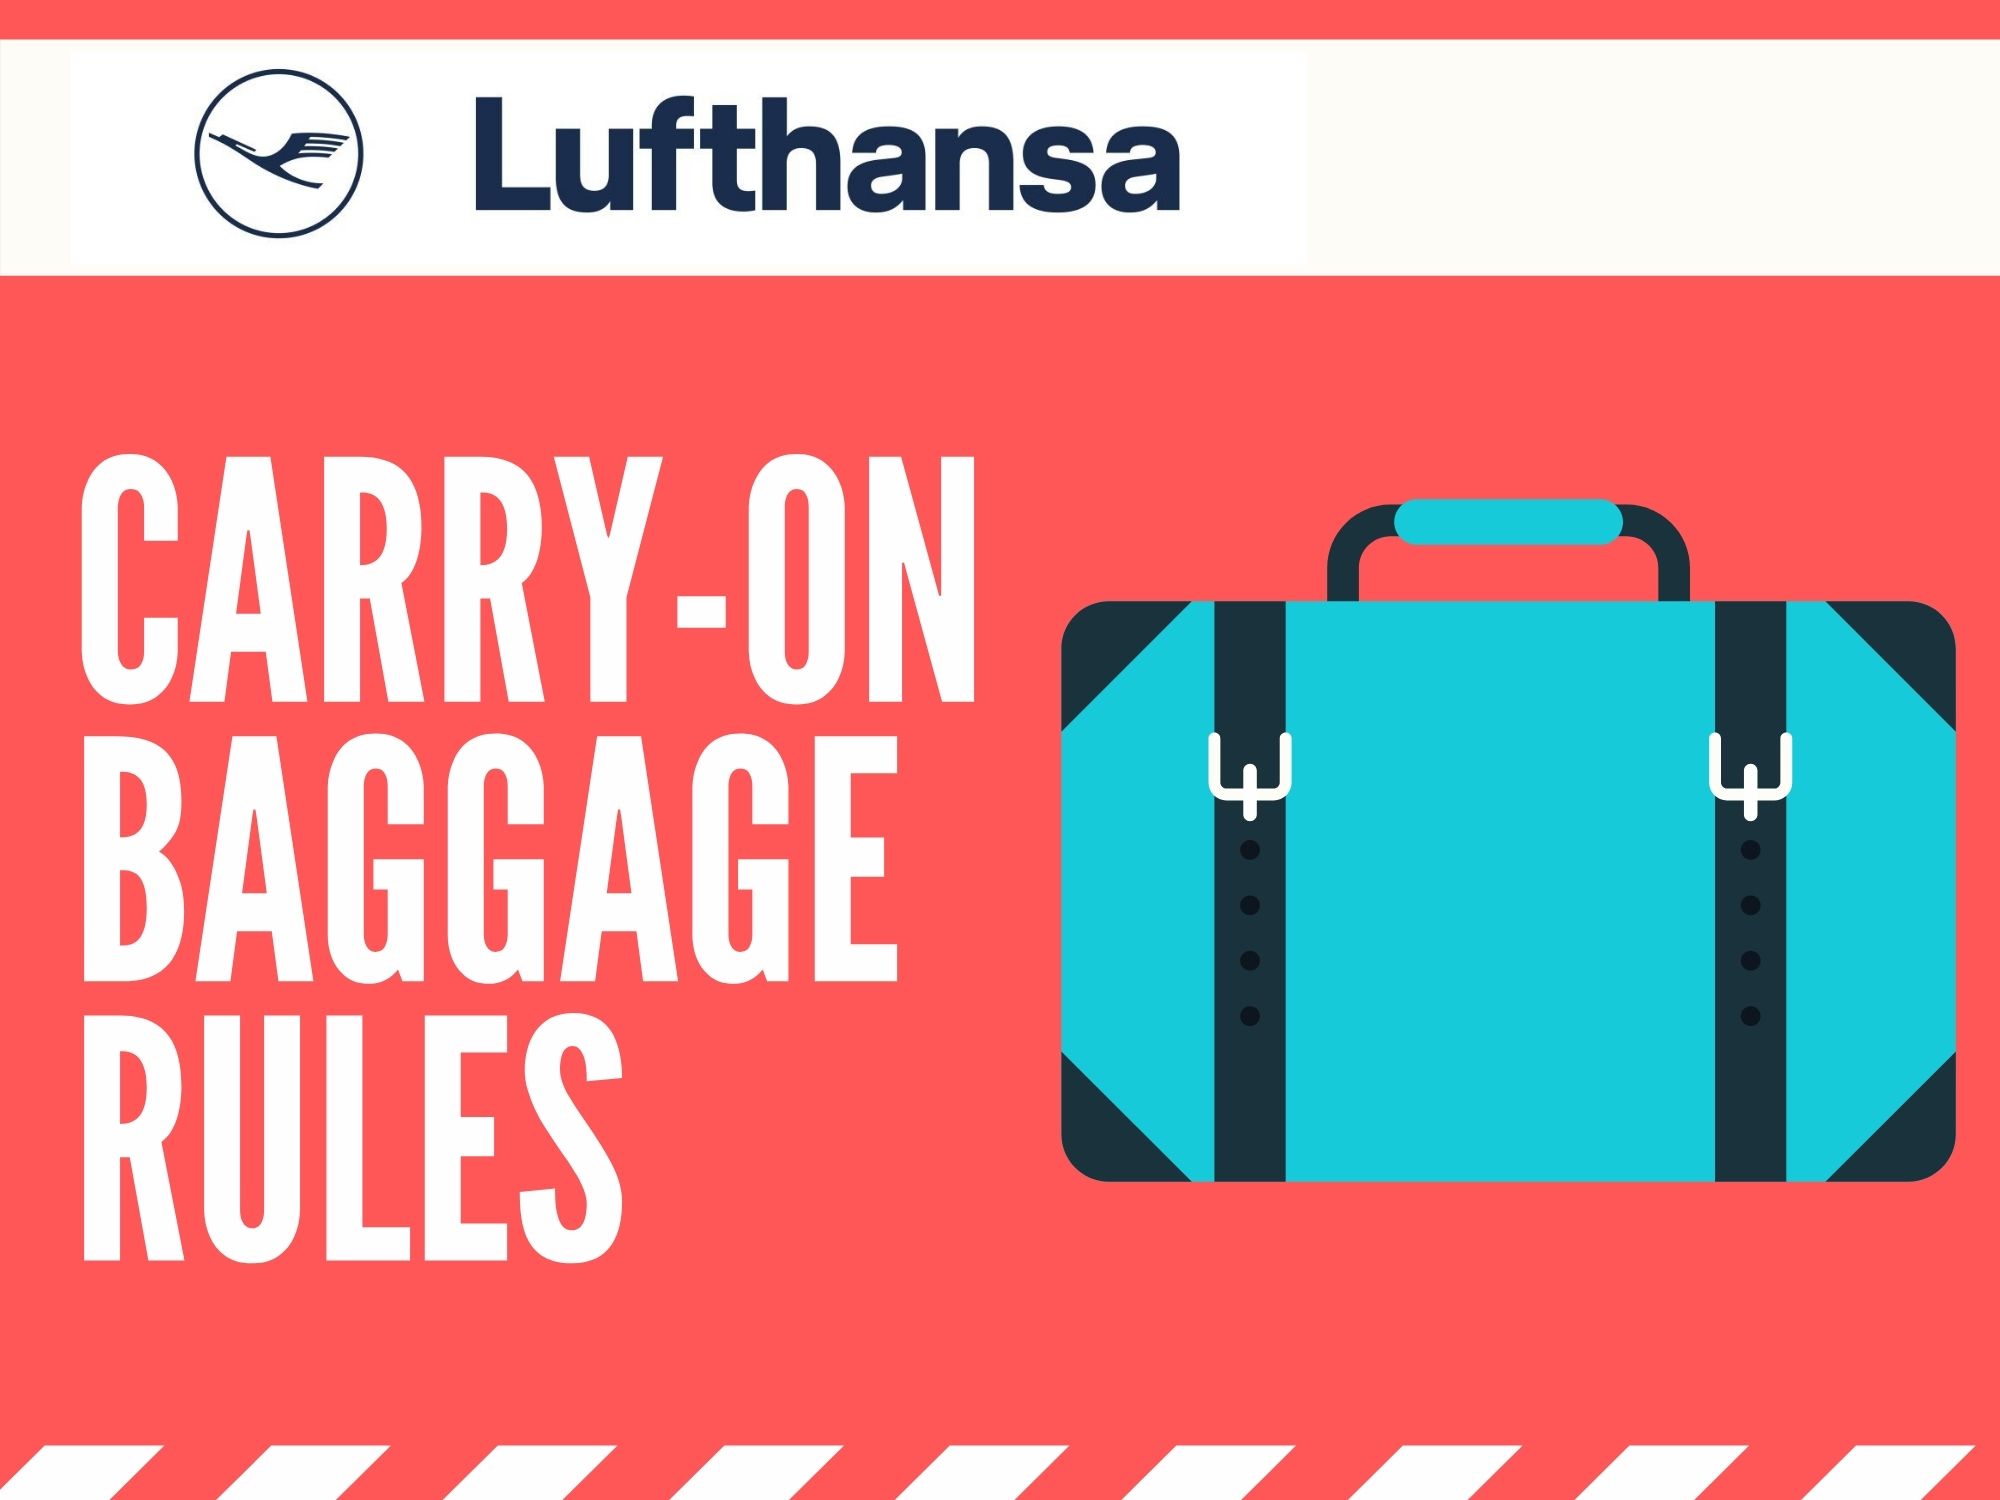 Lufthansa CarryOn Rules Everything You Need to Know